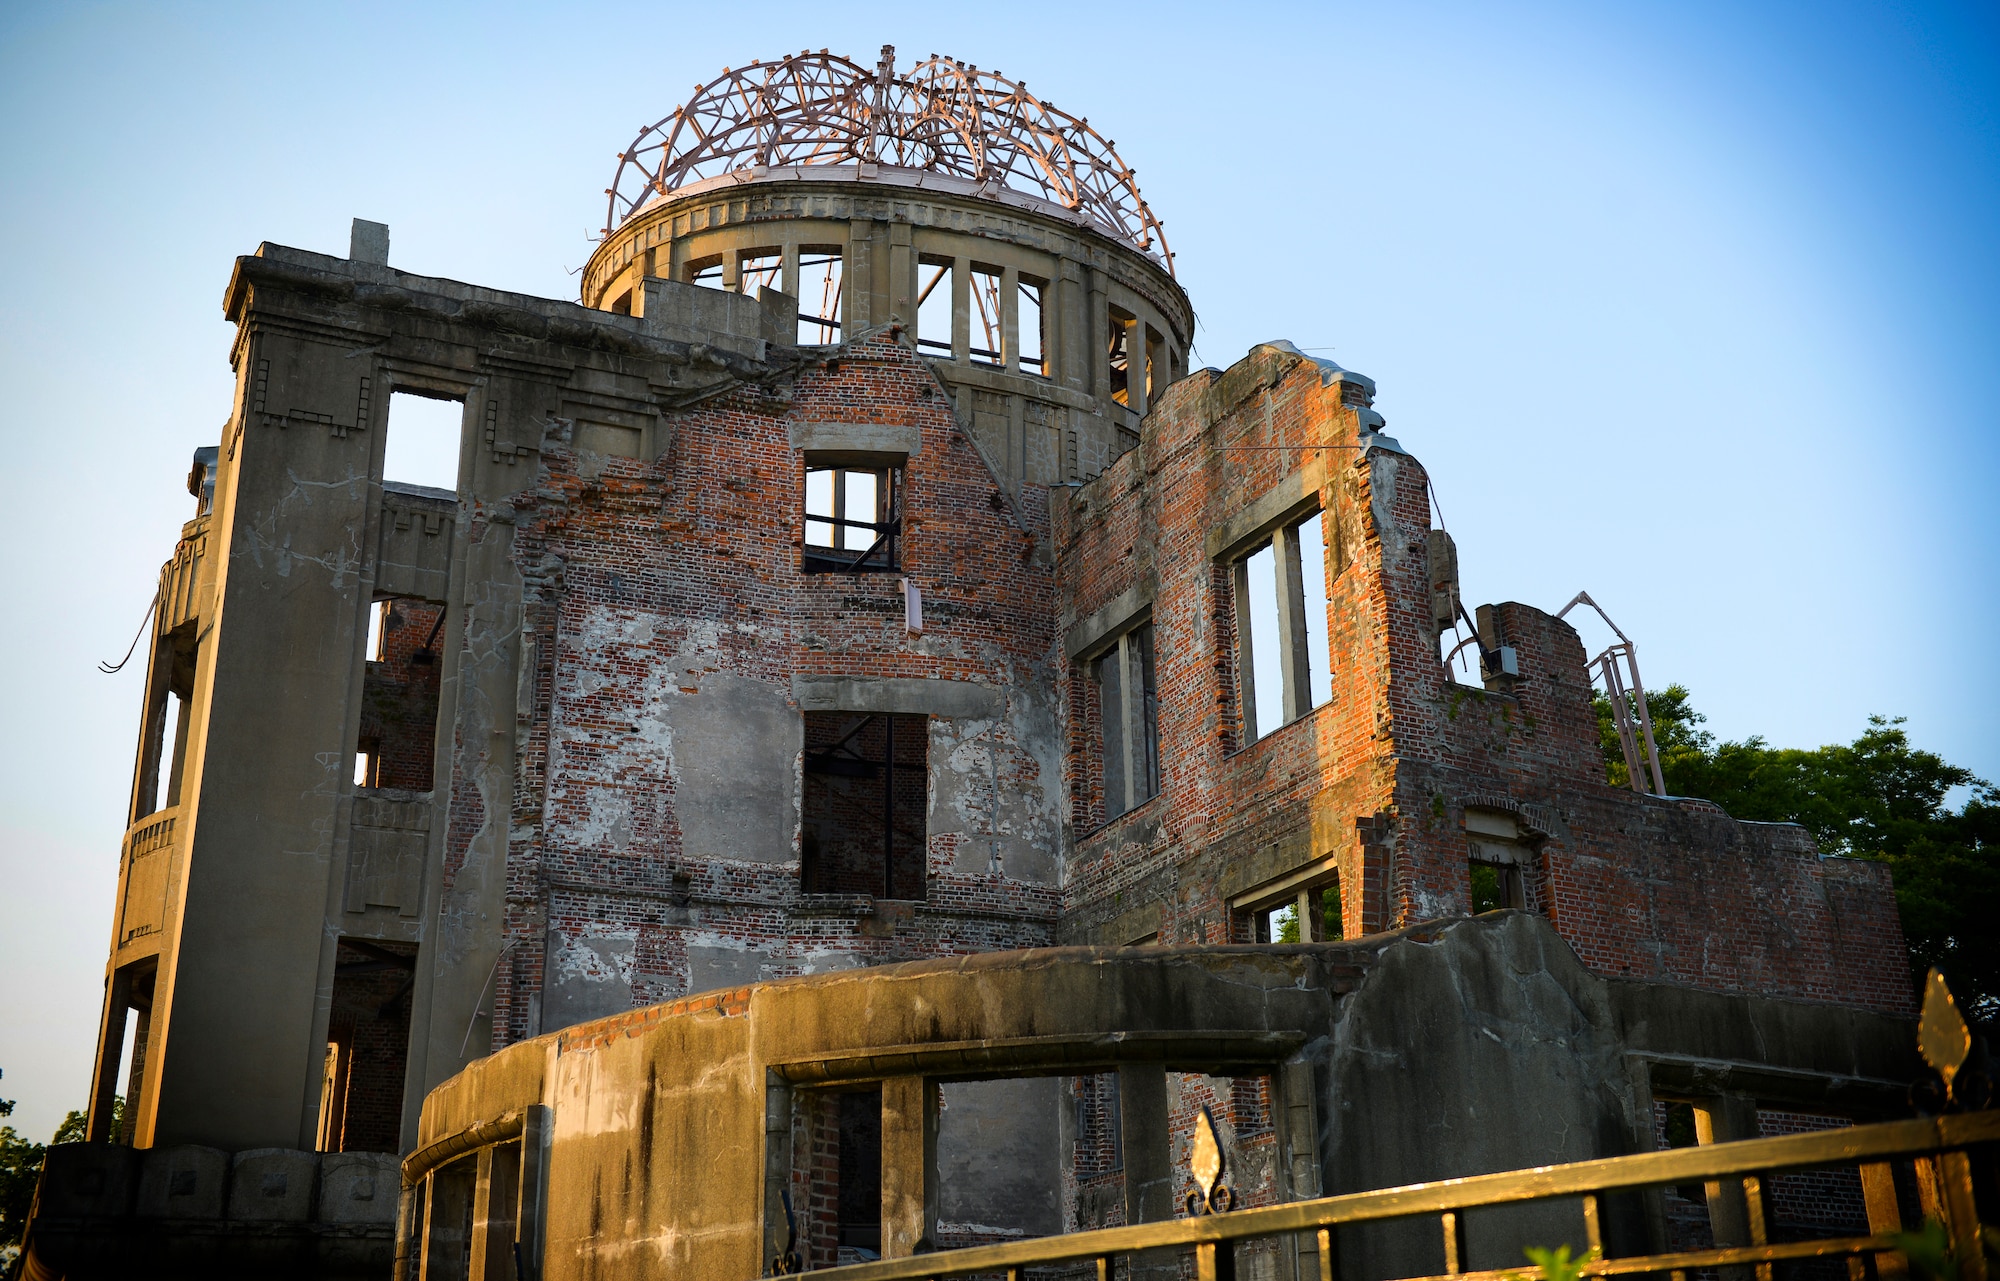 Genbaku Domu, or the Atom-Bomb Dome, stands in Hiroshima, Japan, May 31, 2016. The dome, a designated World Heritage Site, is the remnant of a building which withstood the atomic bomb the U.S. dropped on Hiroshima City at the end of WWII. (U.S. Air Force photo by Airman 1st Class Elizabeth Baker/Released)